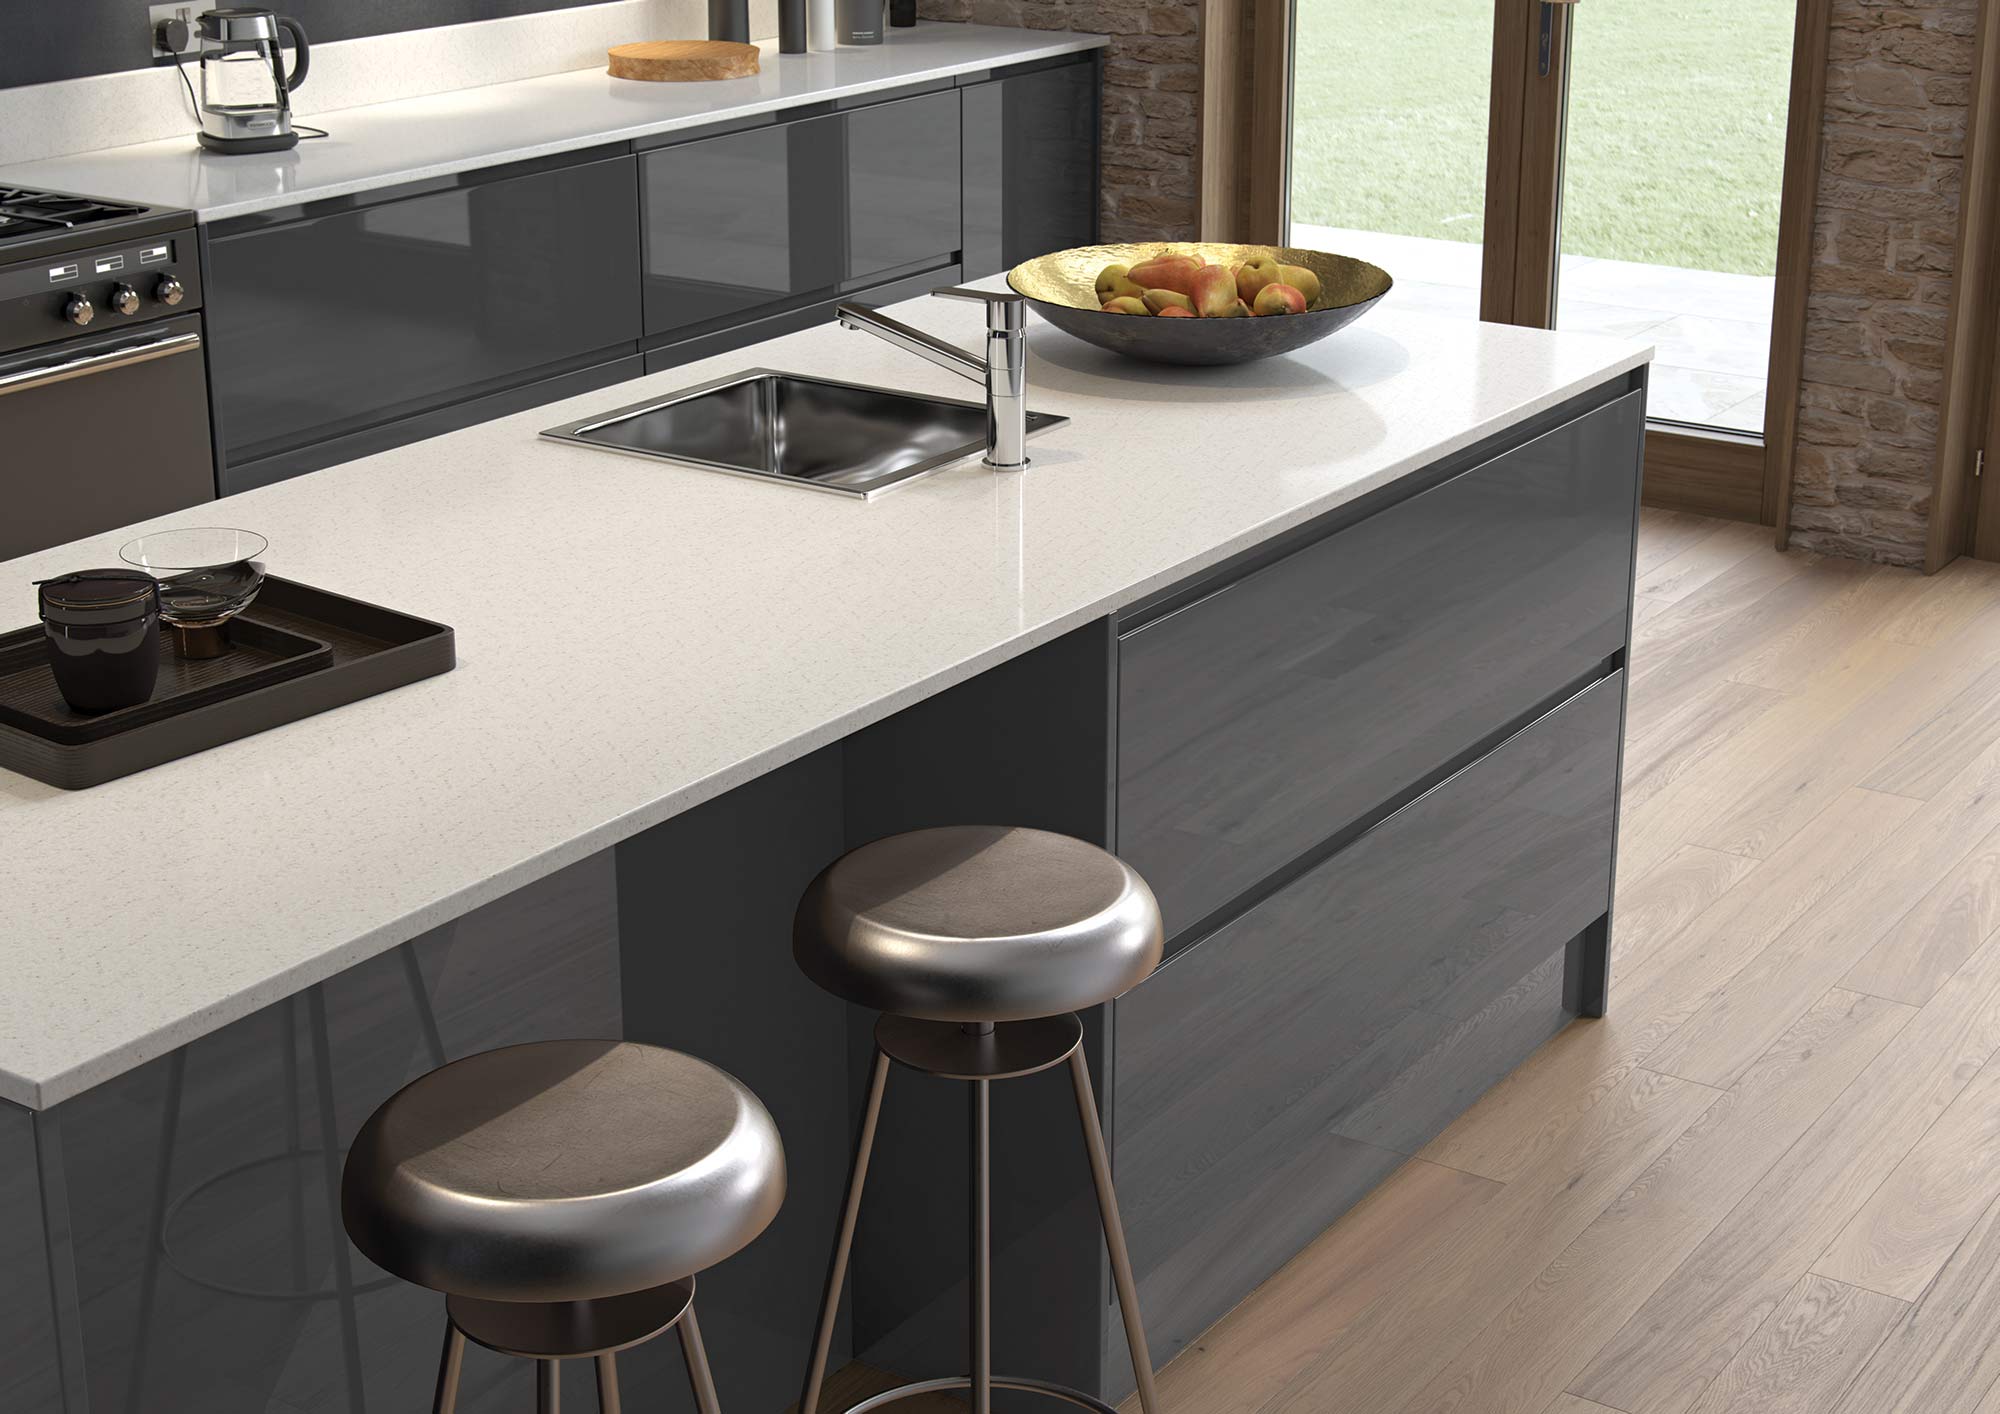 J-pull handleless gloss kitchen graphite and porcelain main picture